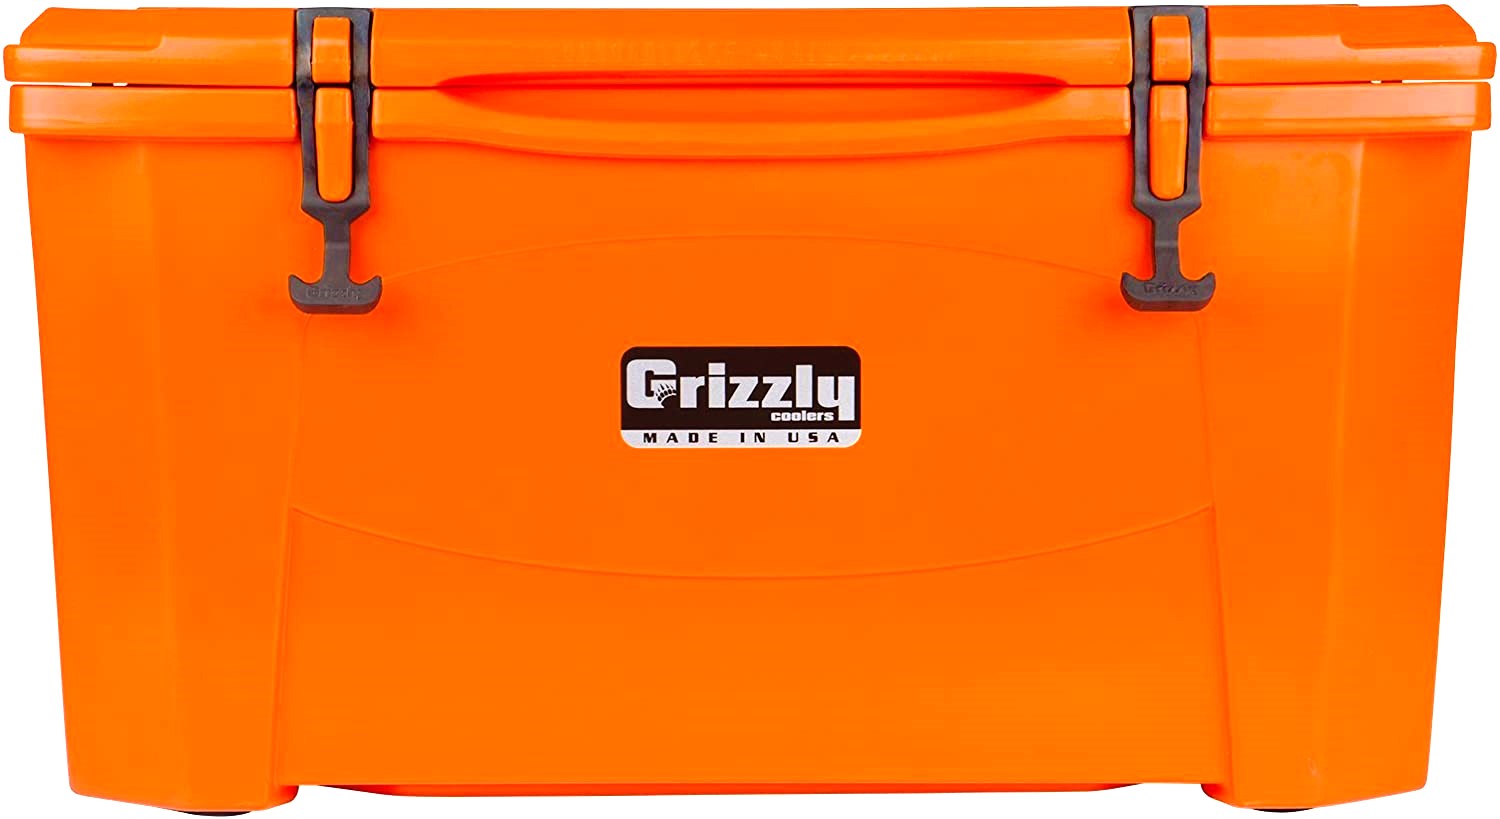 grizzly coolers